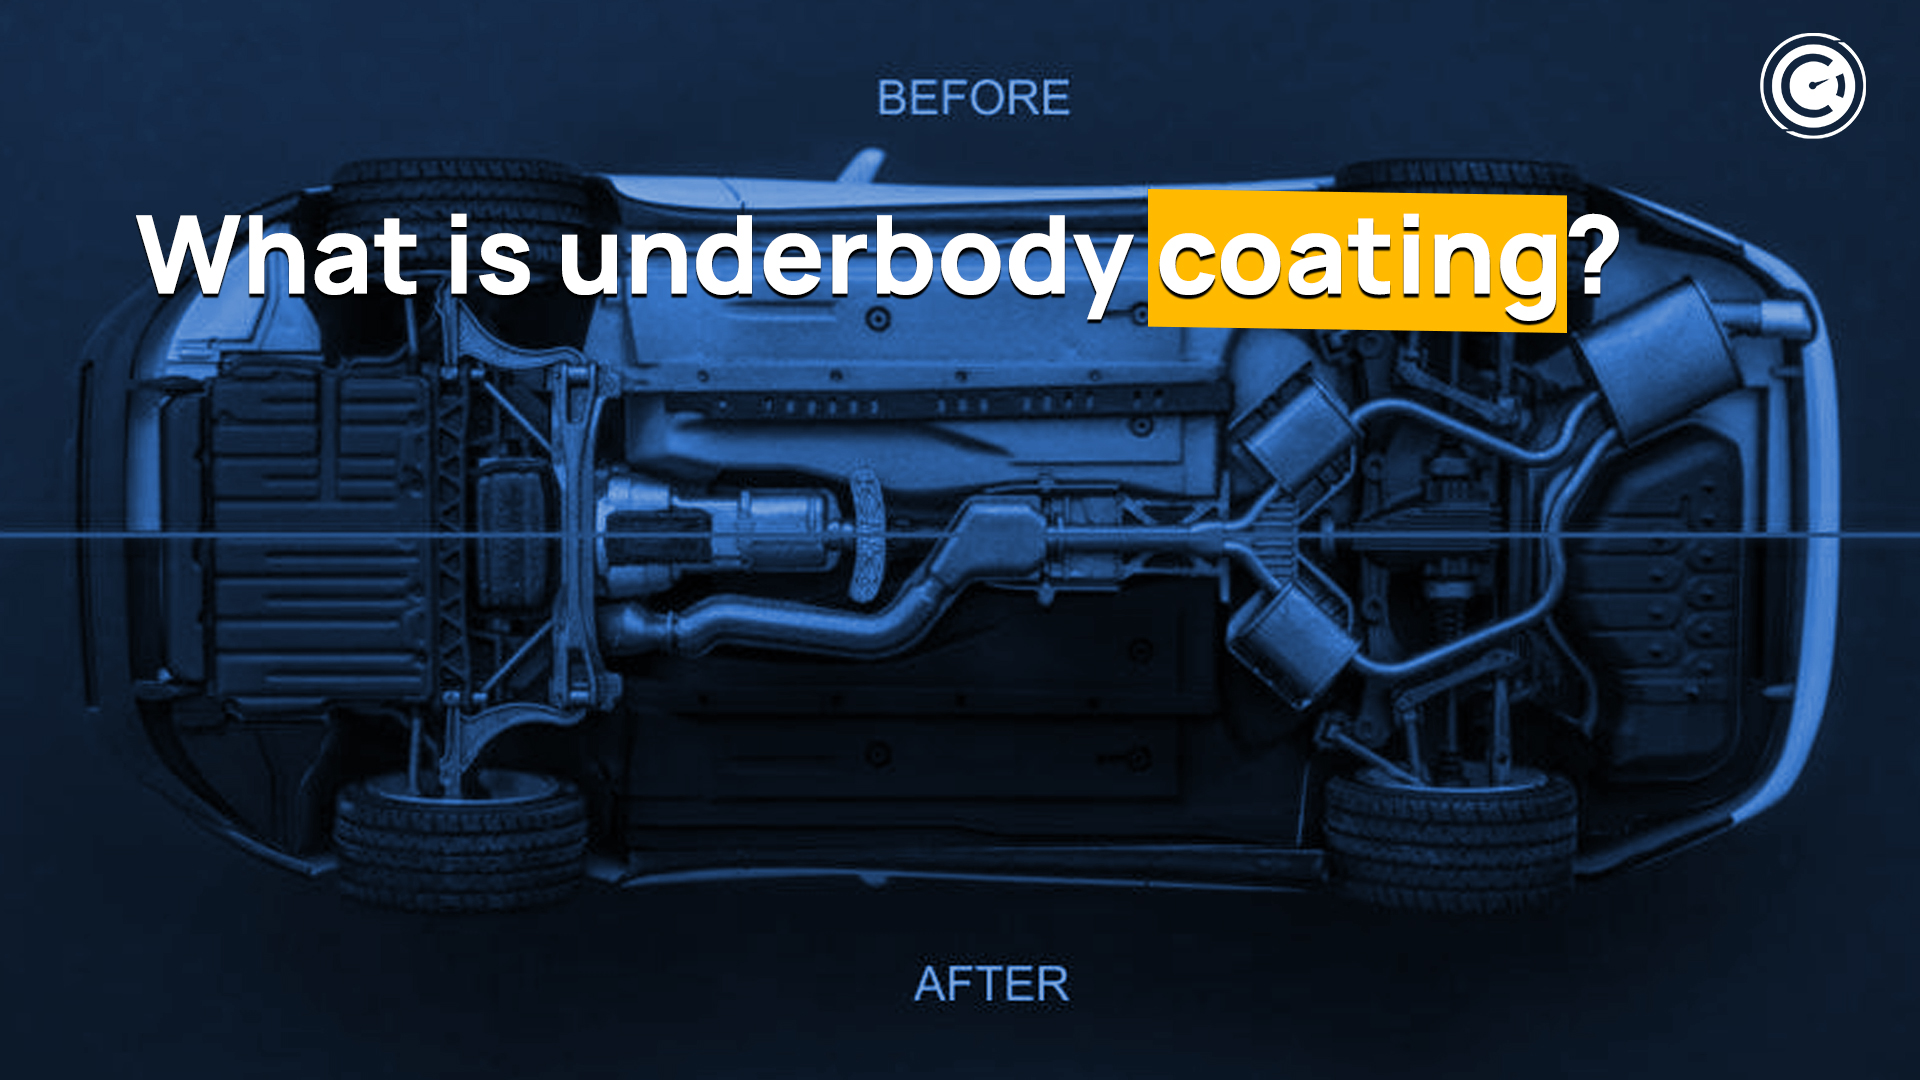 What is underbody coating